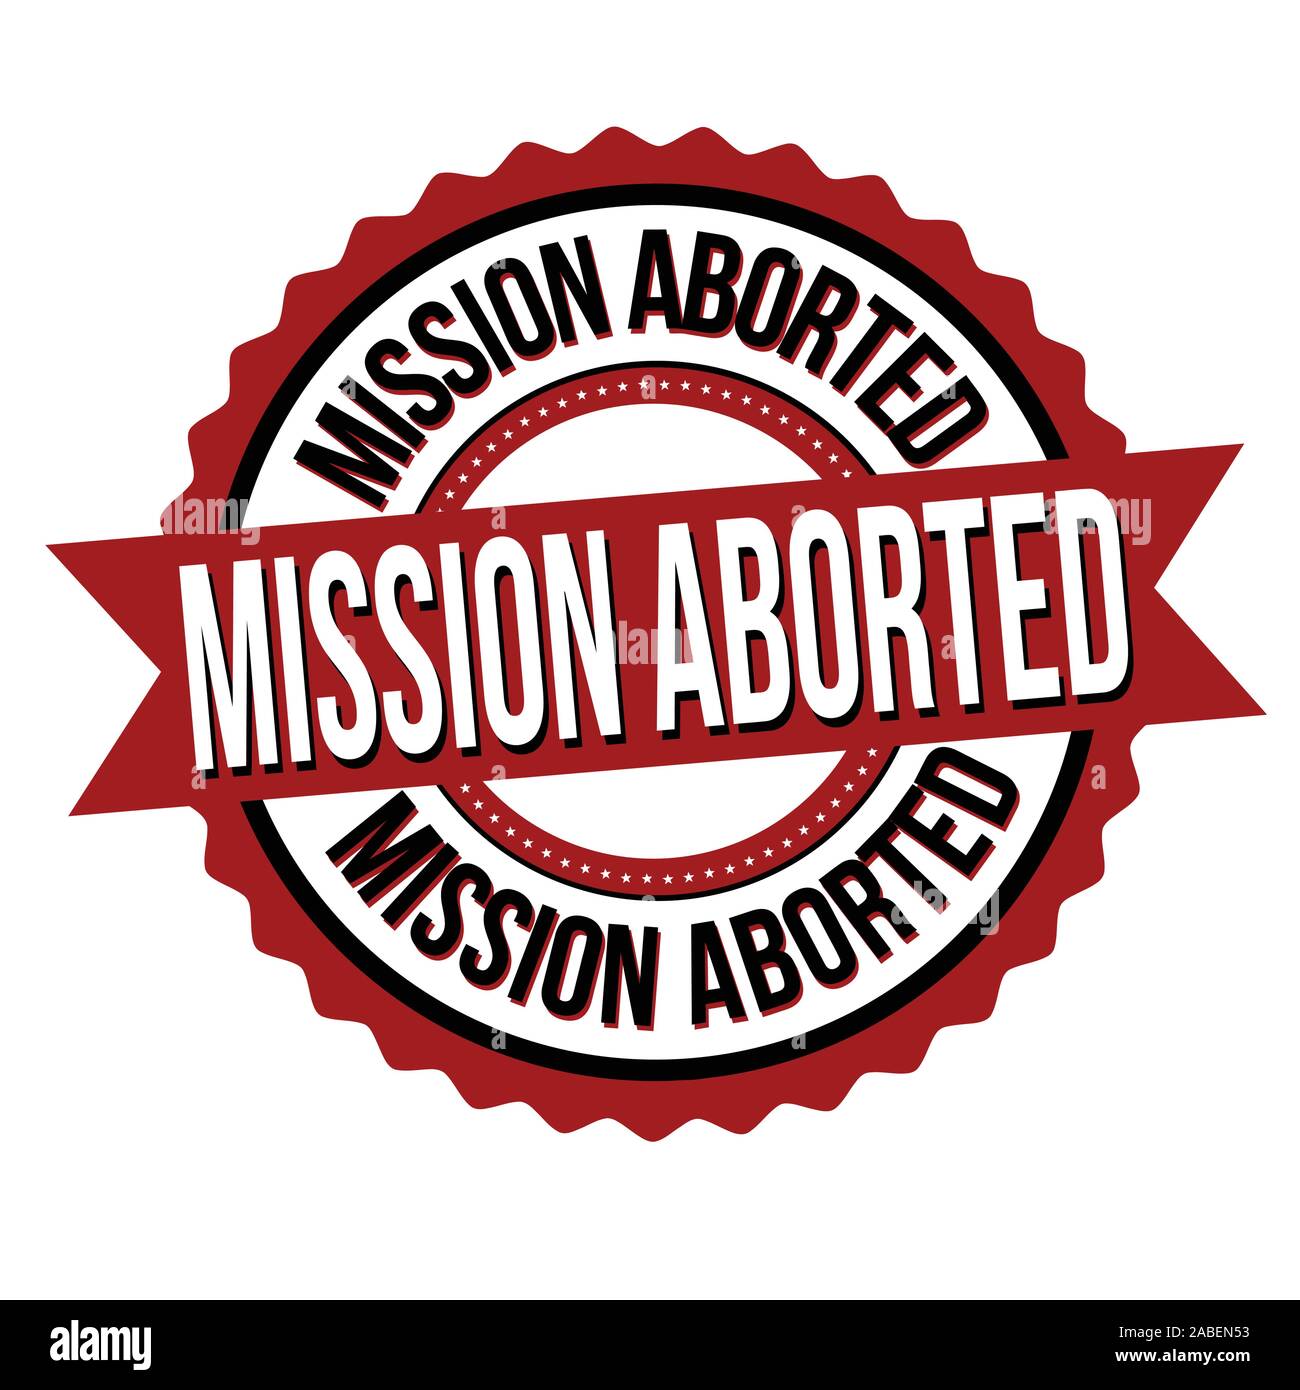 Mission aborted label or sticker on white background, vector illustration Stock Vector